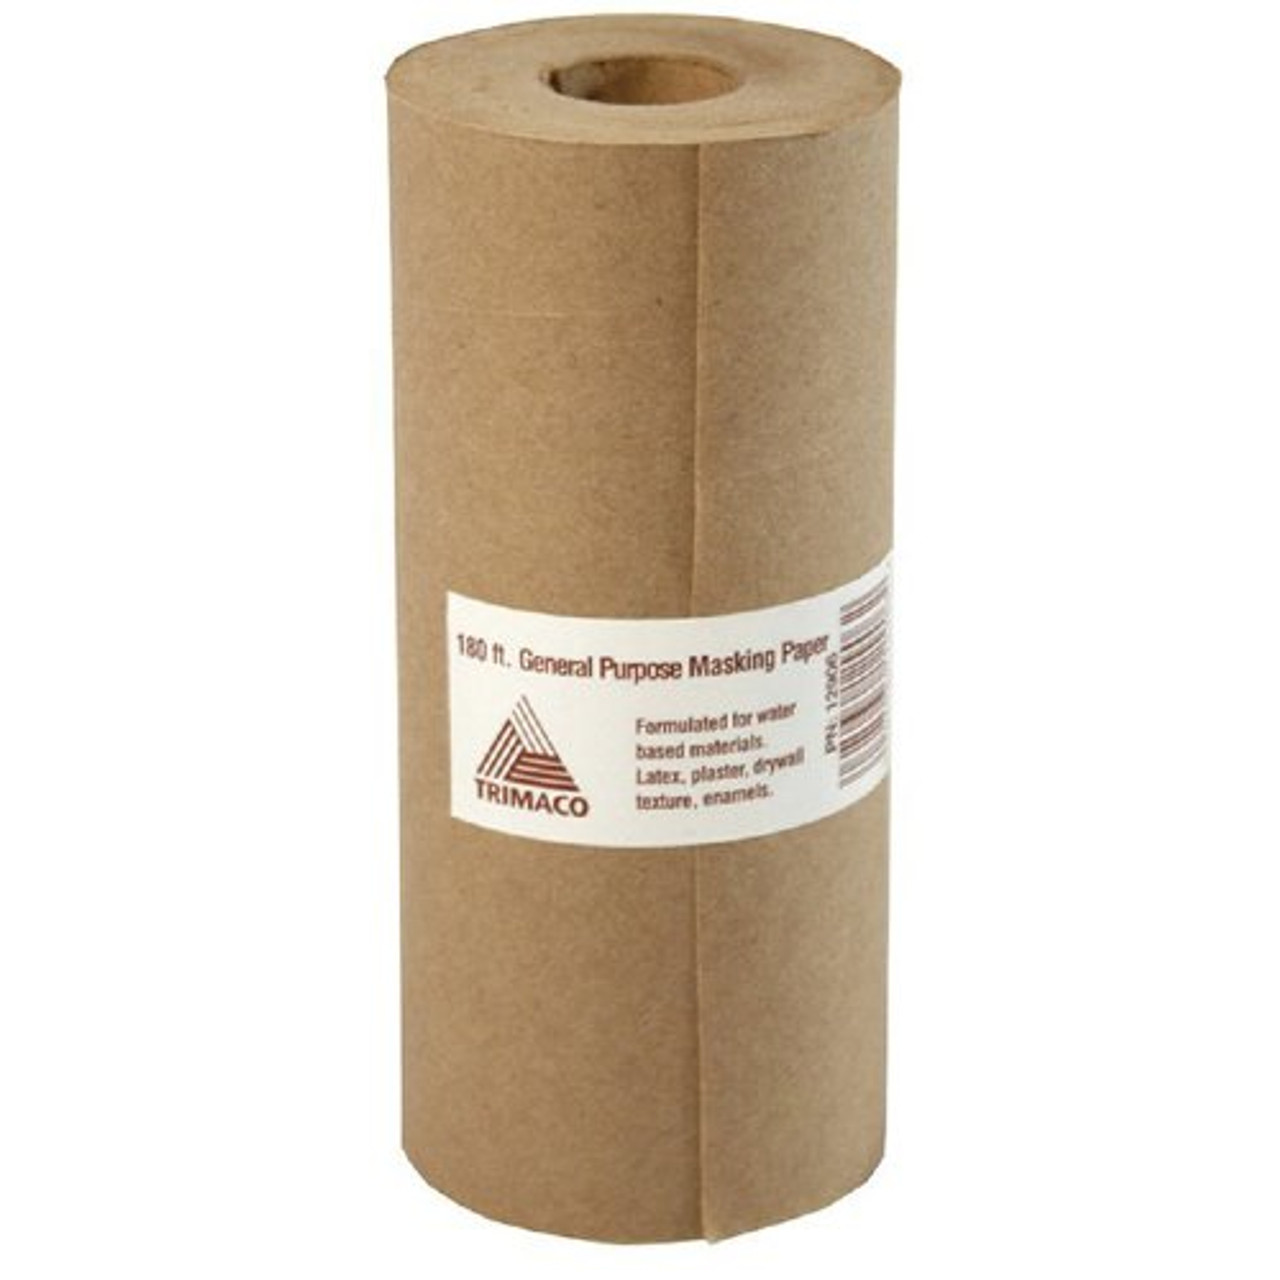 General Purpose Masking Paper 18 inch x 180 ft., from Best Materials